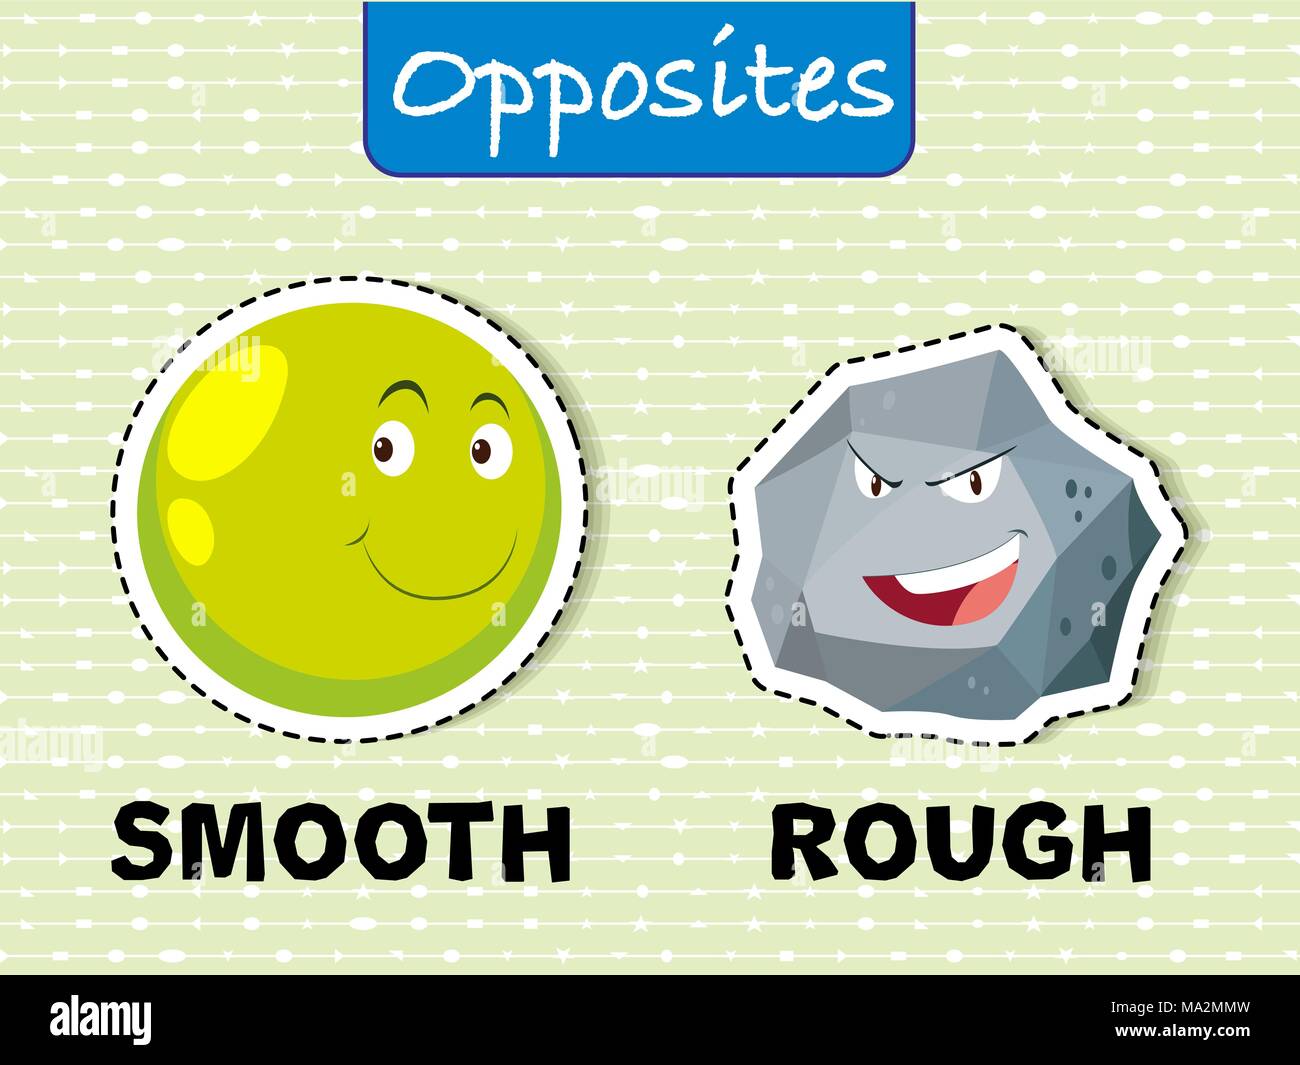 Opposite words for smooth and rough illustration Stock Vector Image & Art -  Alamy